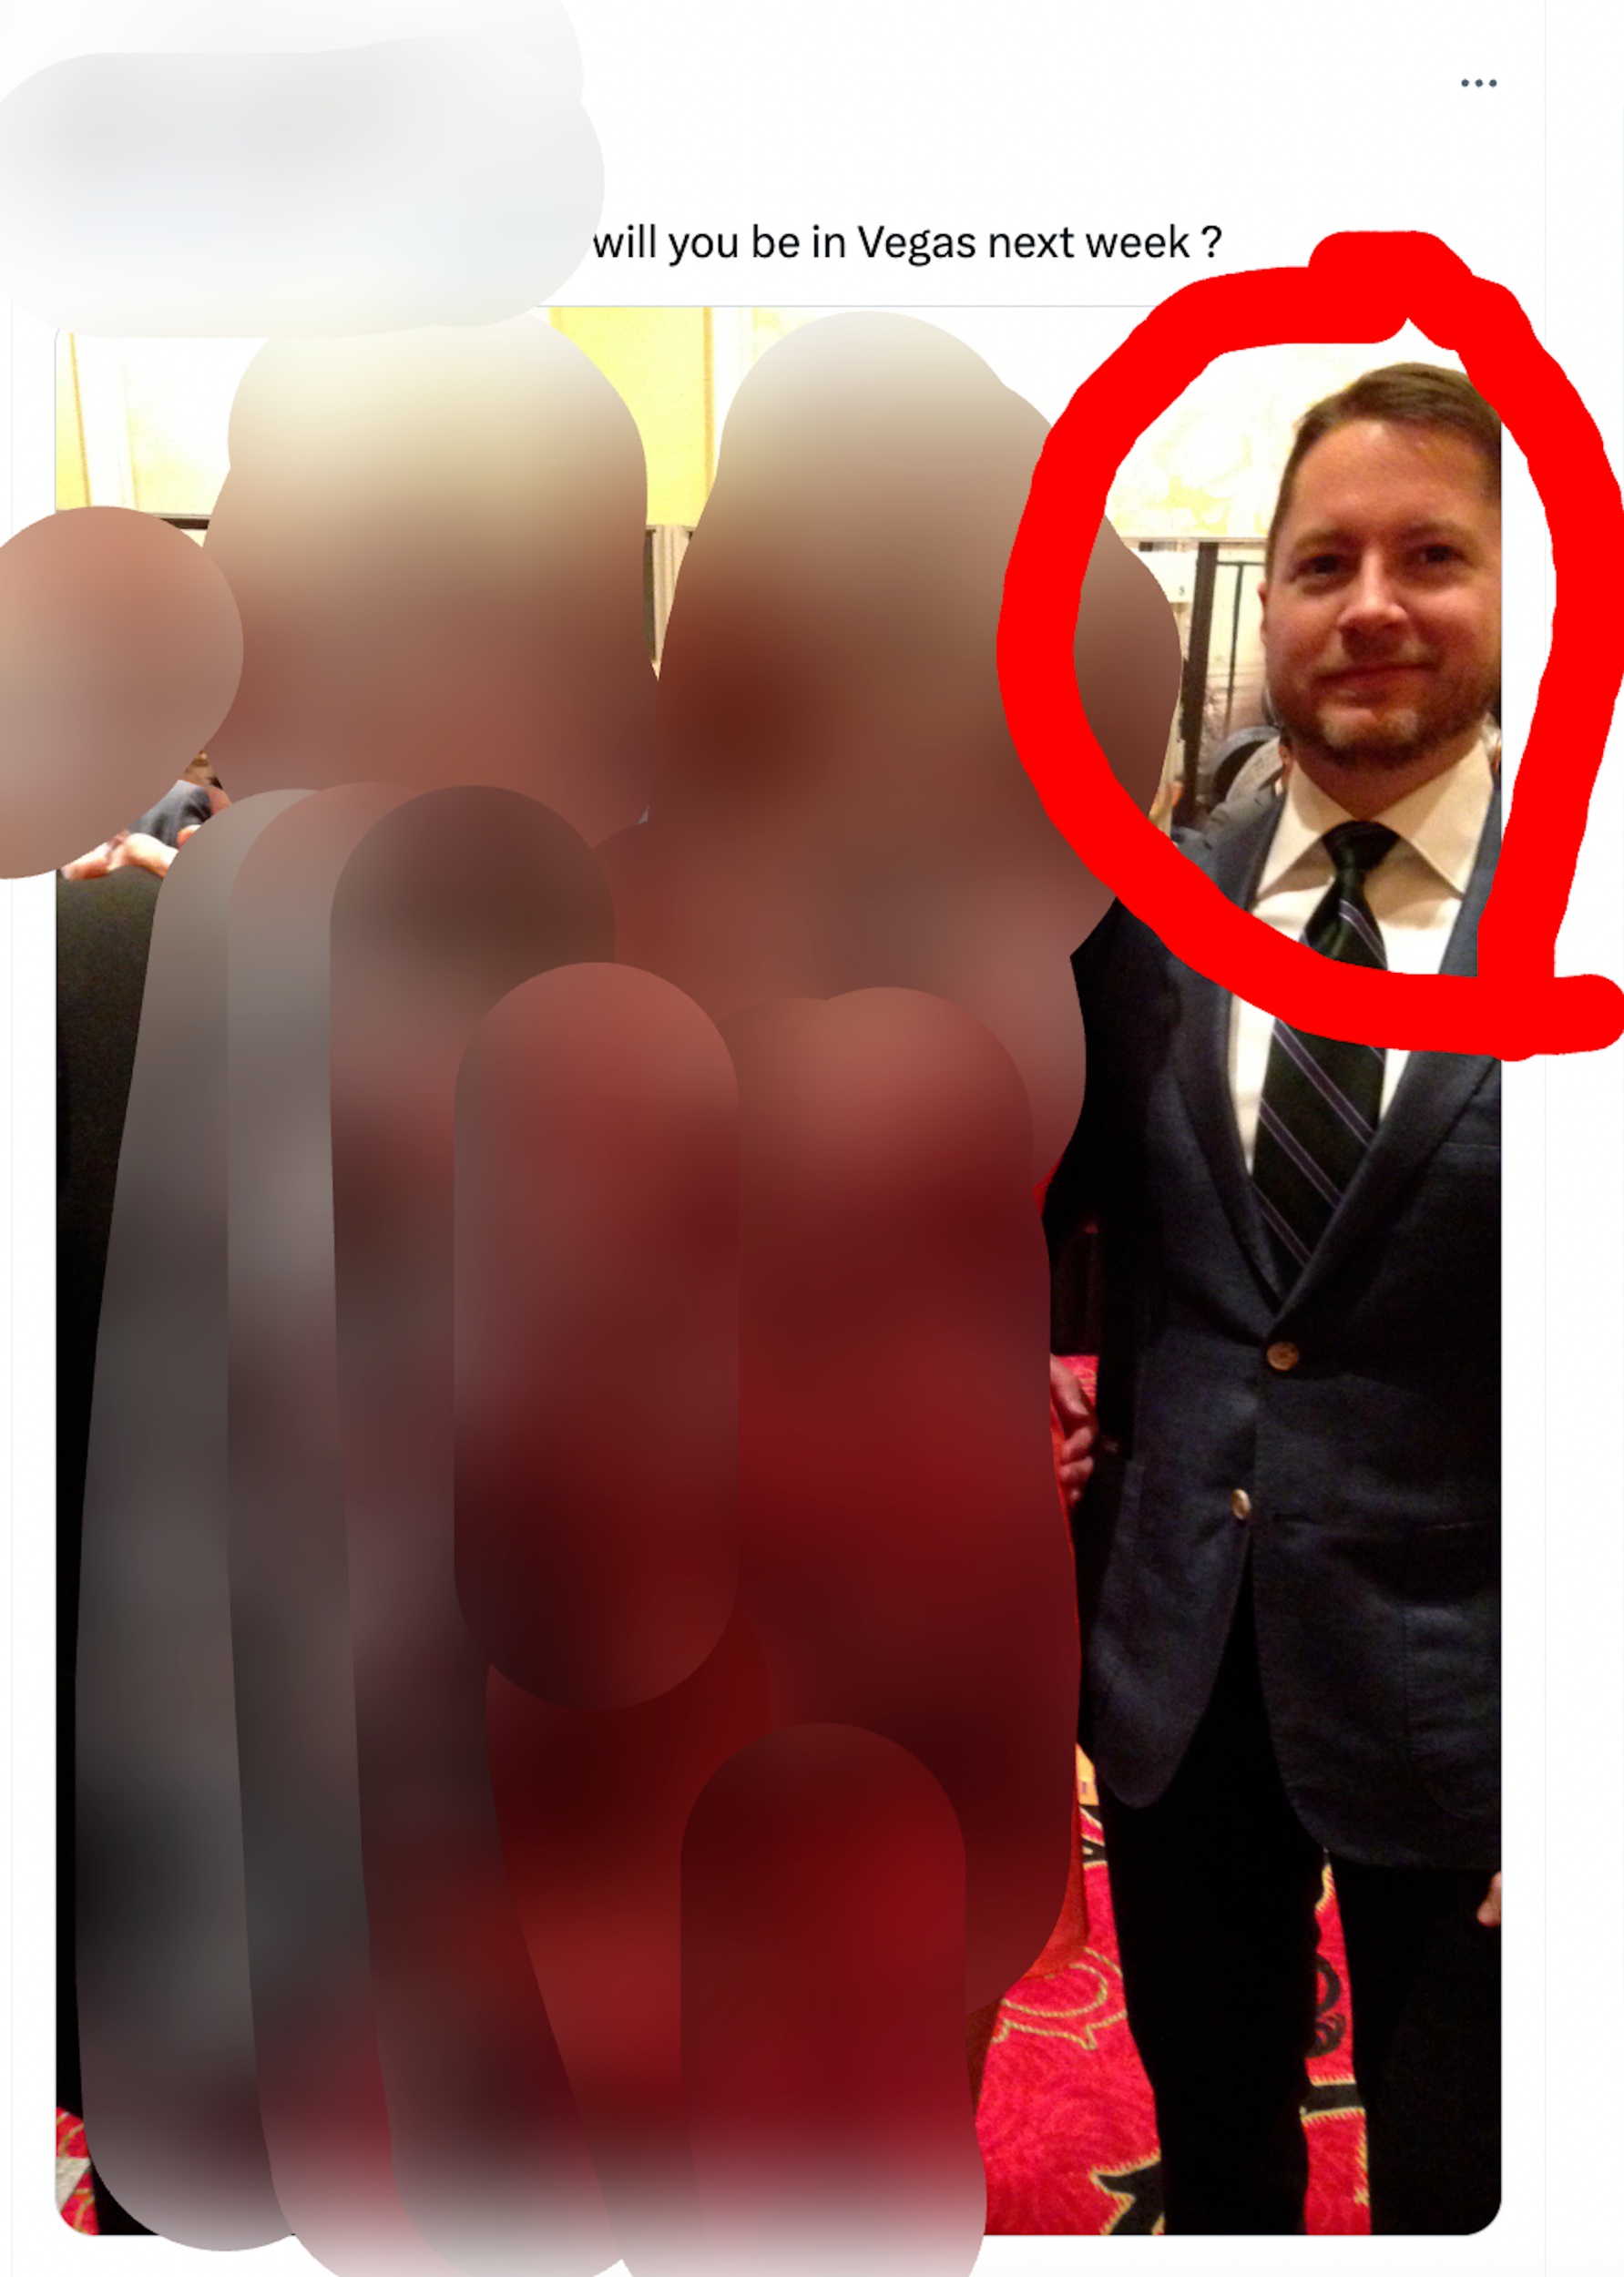 Blurred out pic of two people standing next to lightly bearded man in formal attire. Text above it reads, "will you be in Vegas next week?"